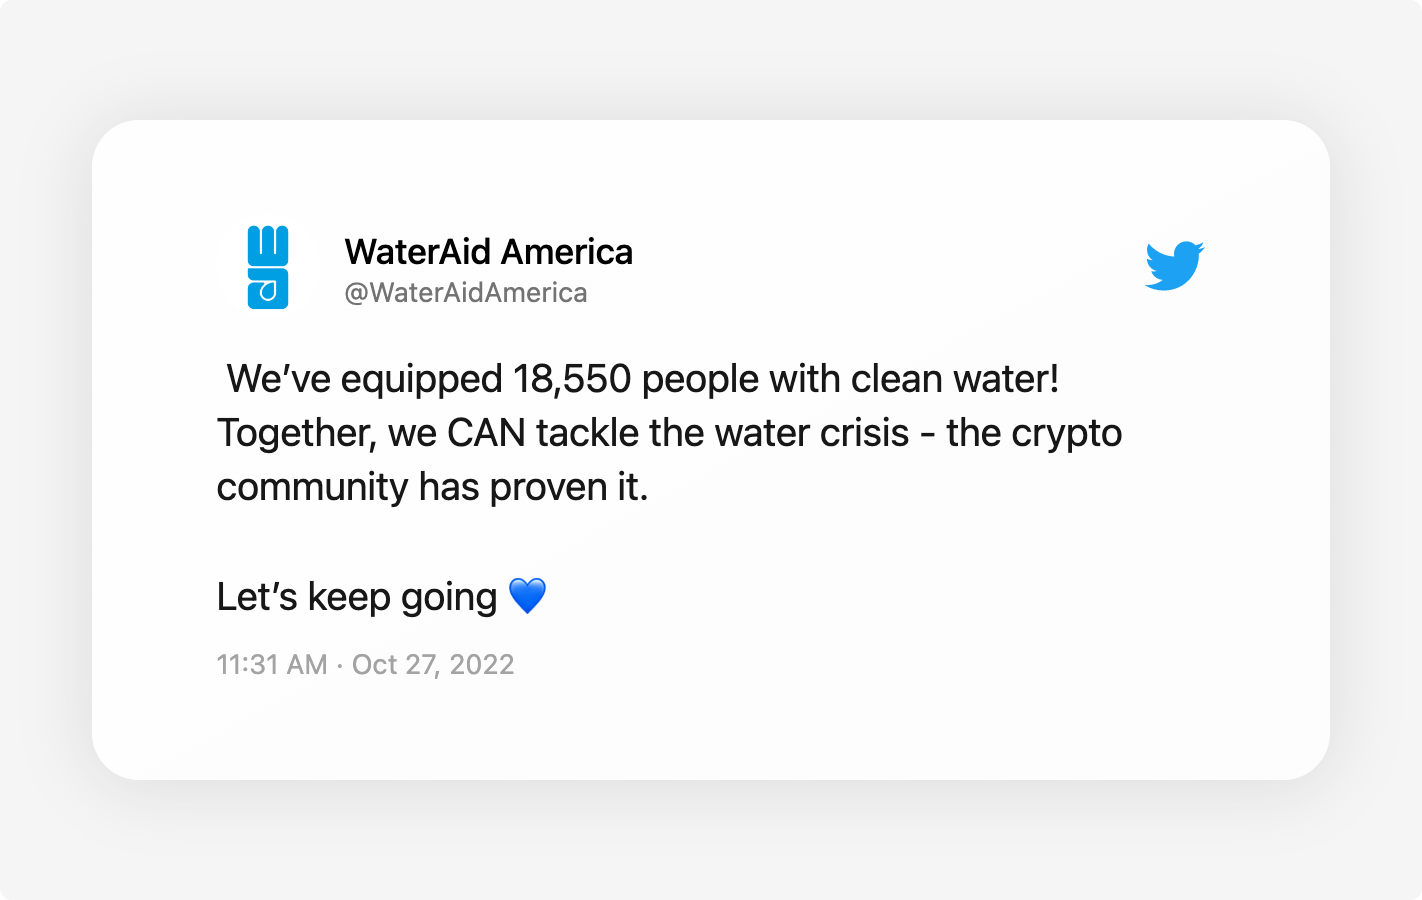 b twitter - Nonprofits Are Sharing How They Use Their Crypto Donations | The Giving Block